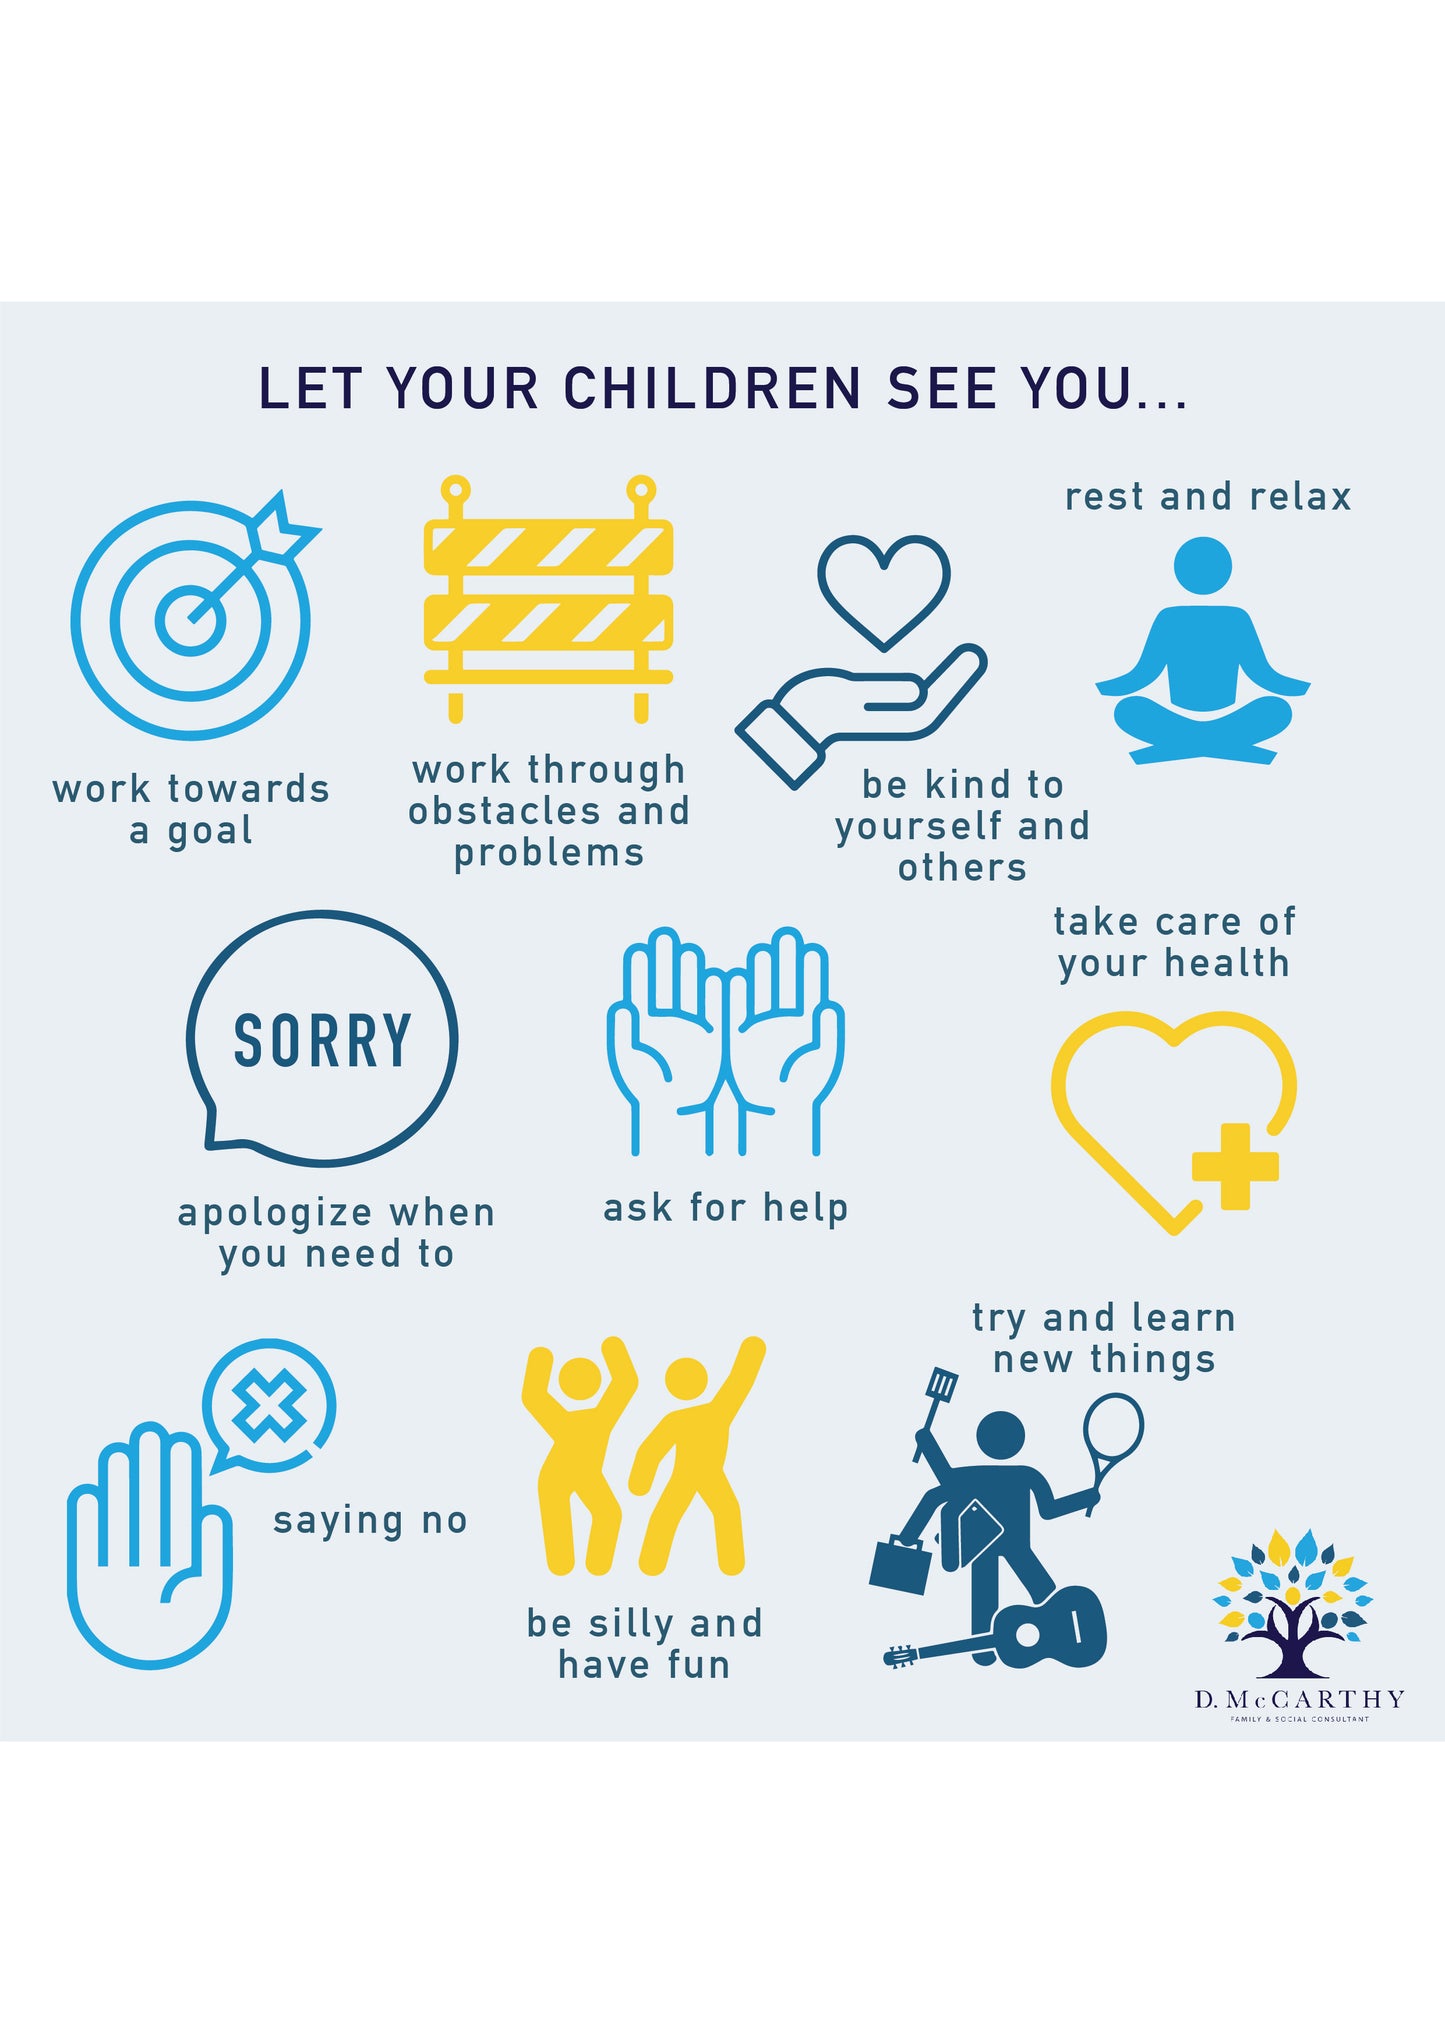 let your children see you .....